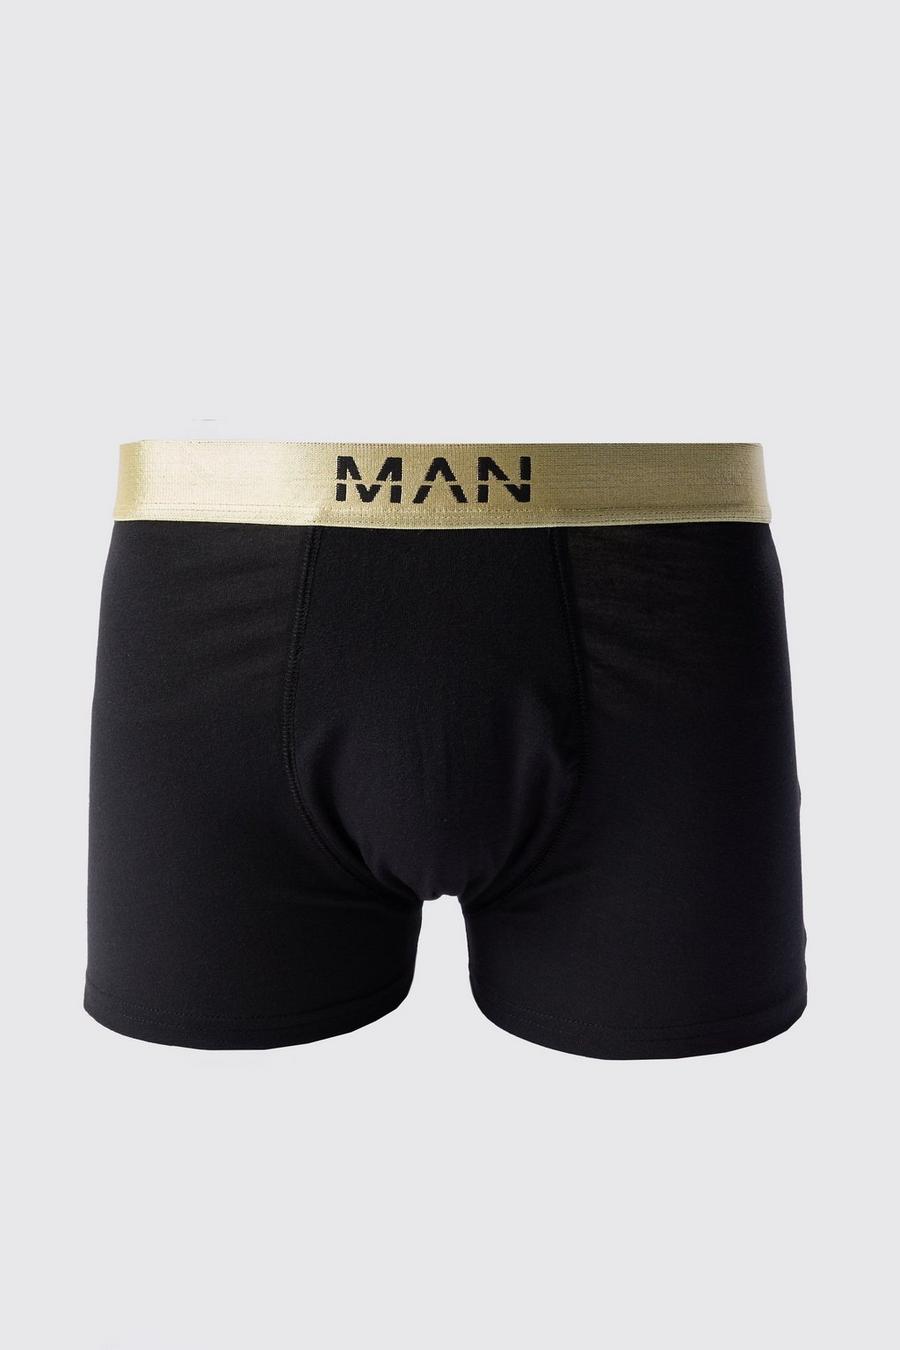 Man Dash Gold Waistband Boxers In Black image number 1